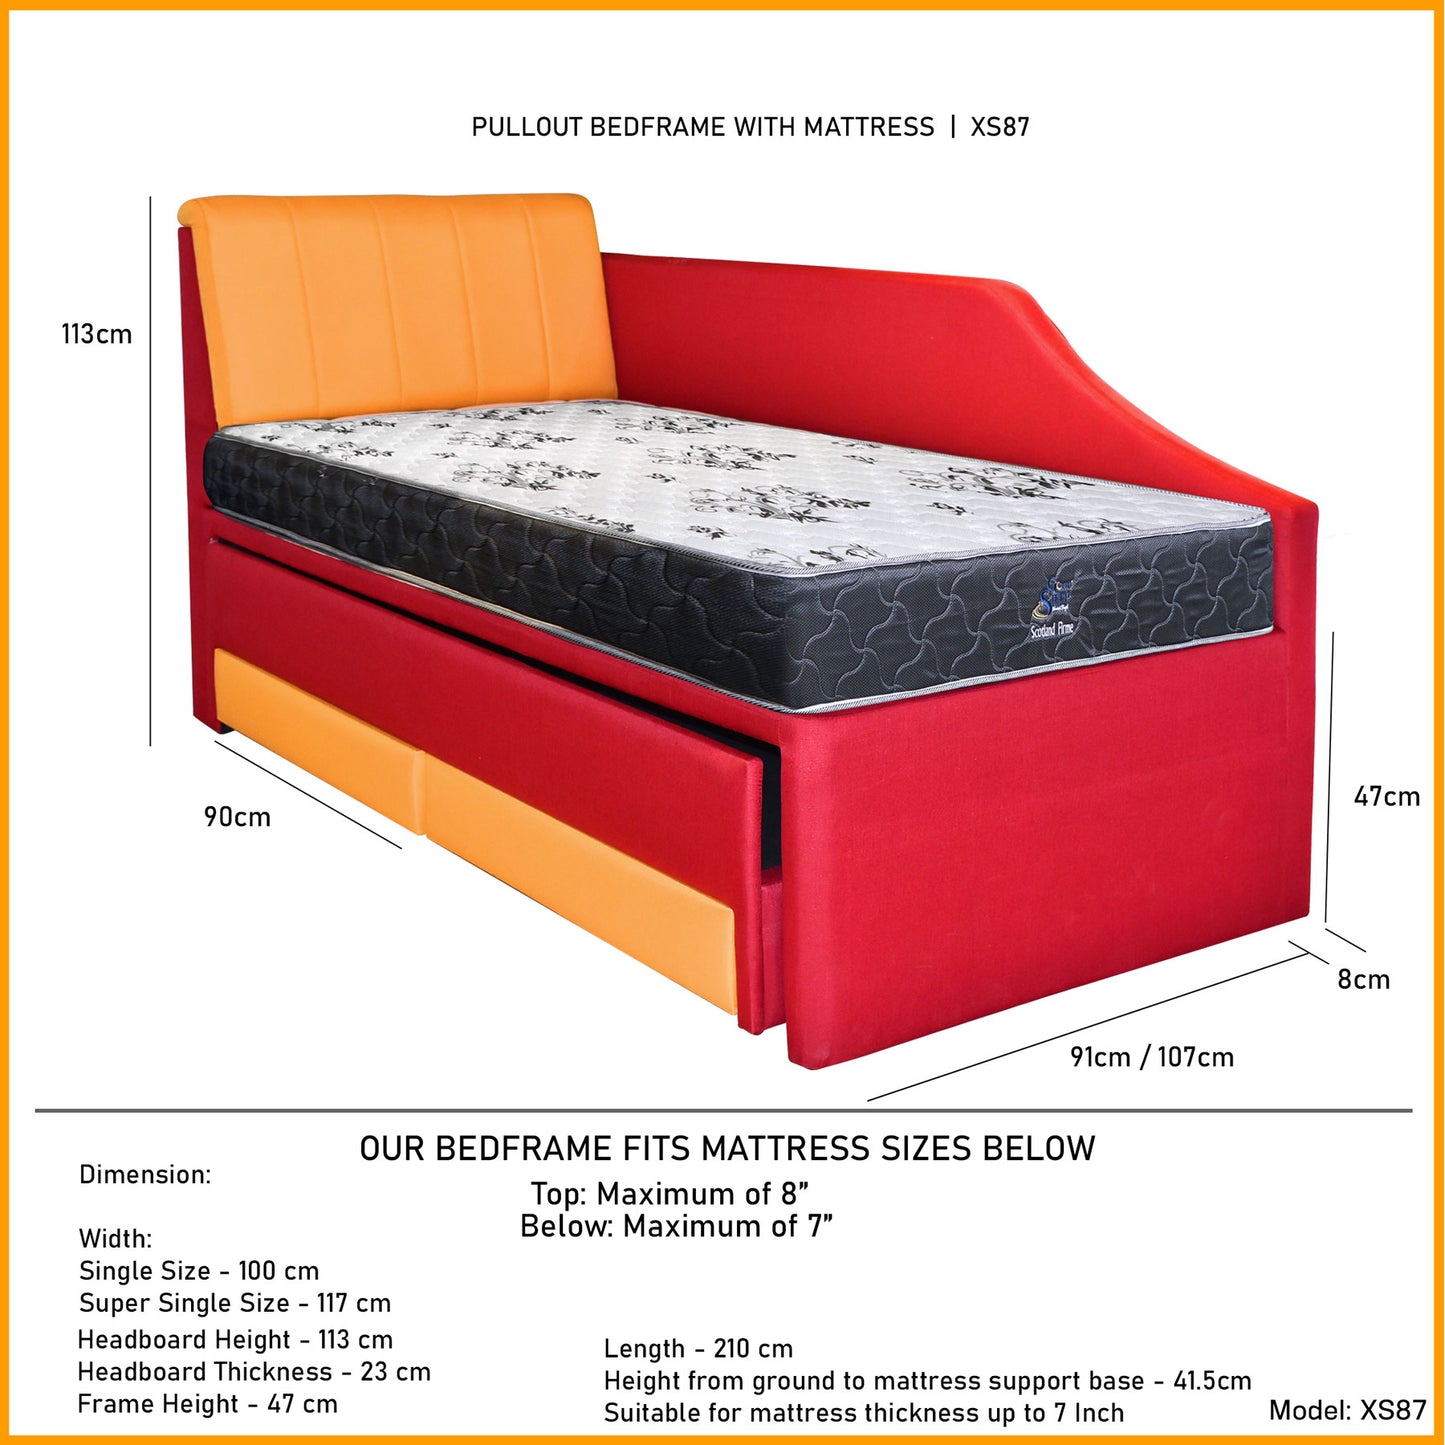 Pullout Bedframe 5in1 with Mattress | MLS87